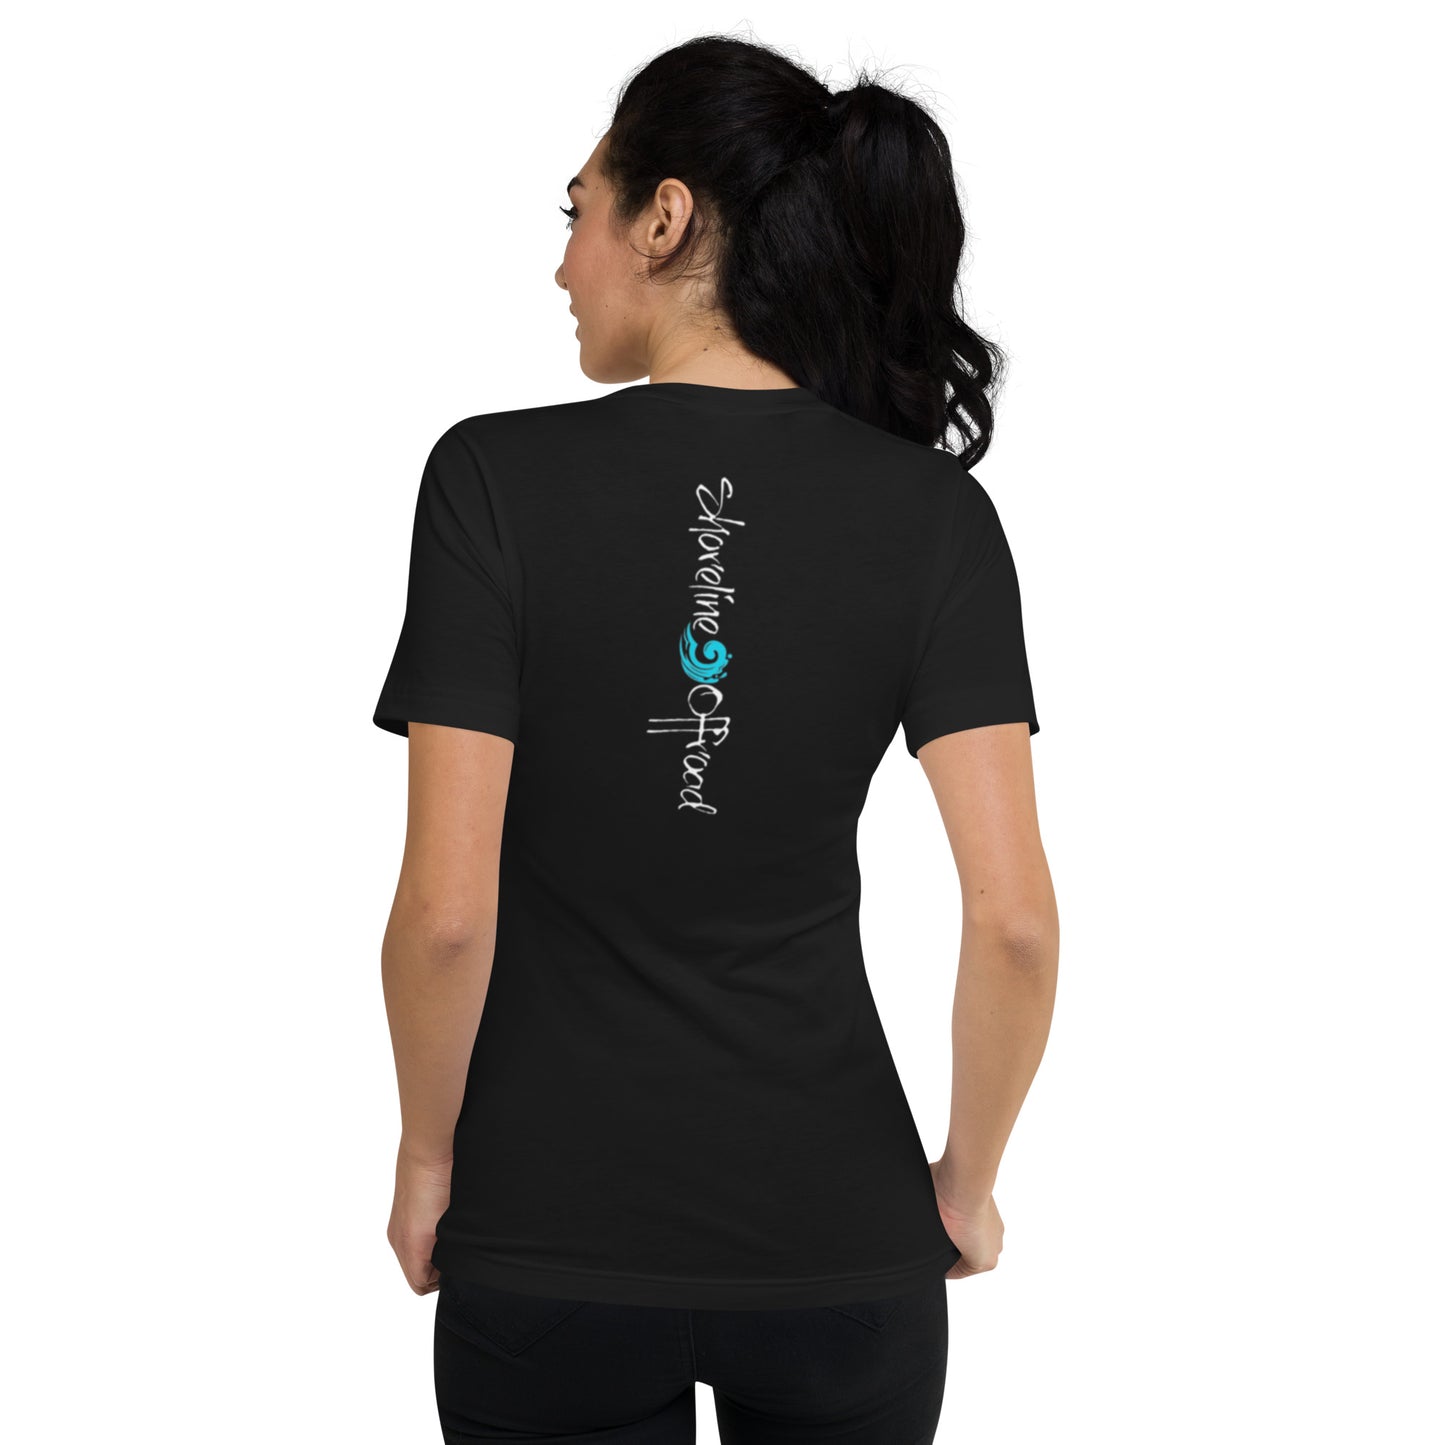 a woman wearing a black t - shirt with a blue bird on it